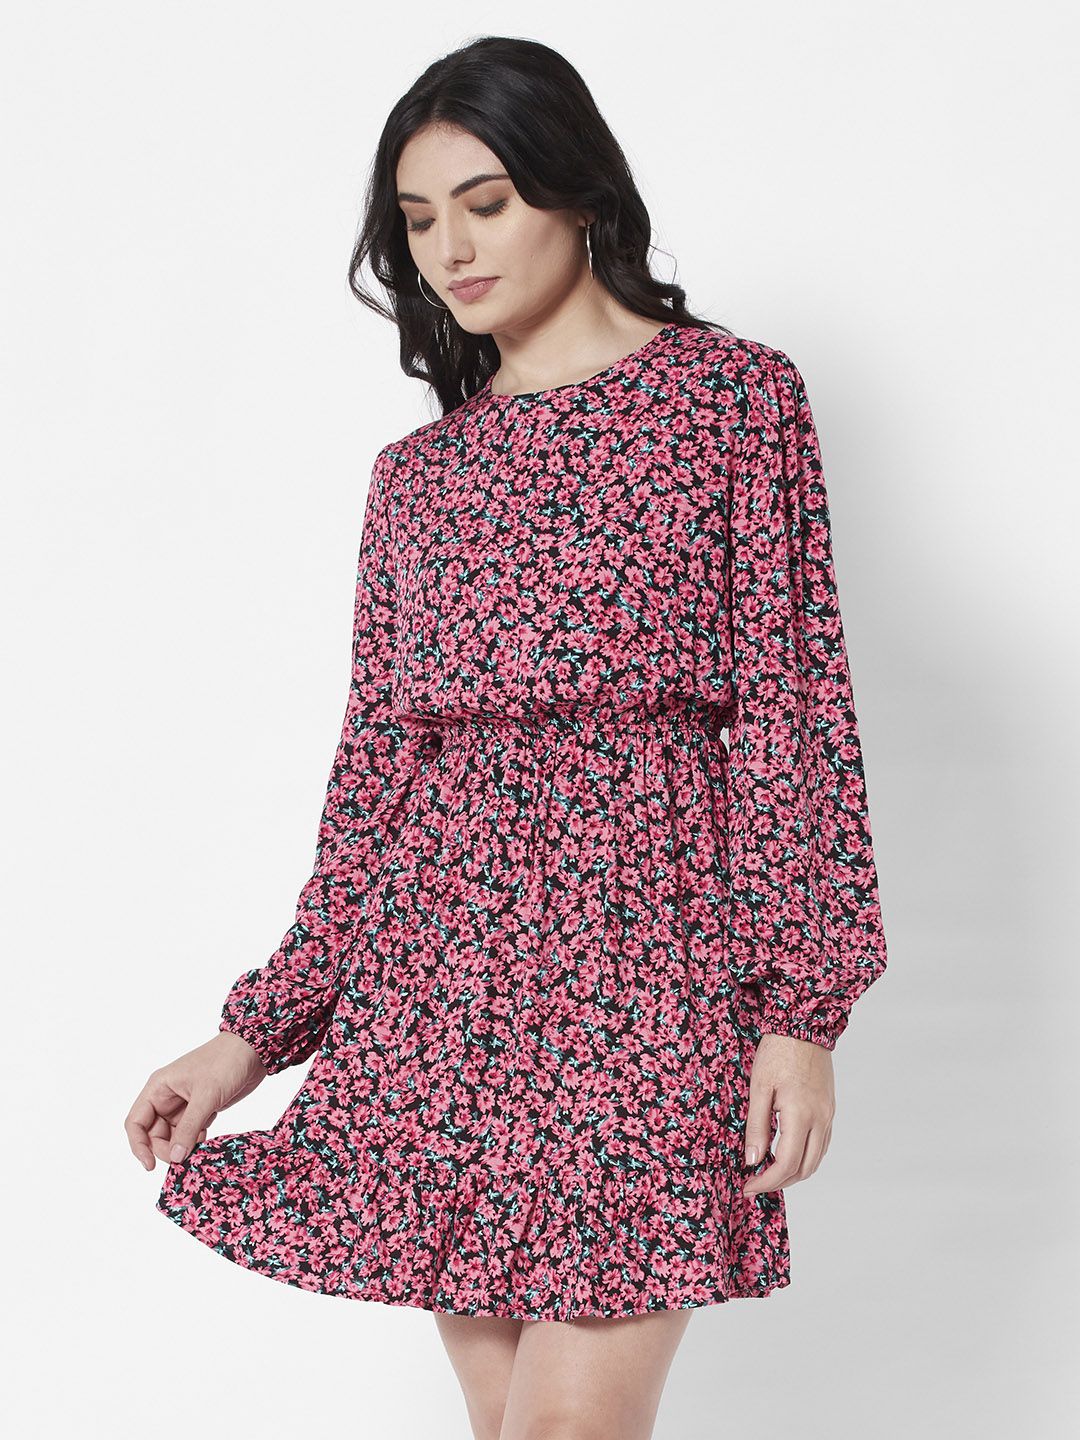 URBANIC Black & Pink Floral A-Line Dress Price in India